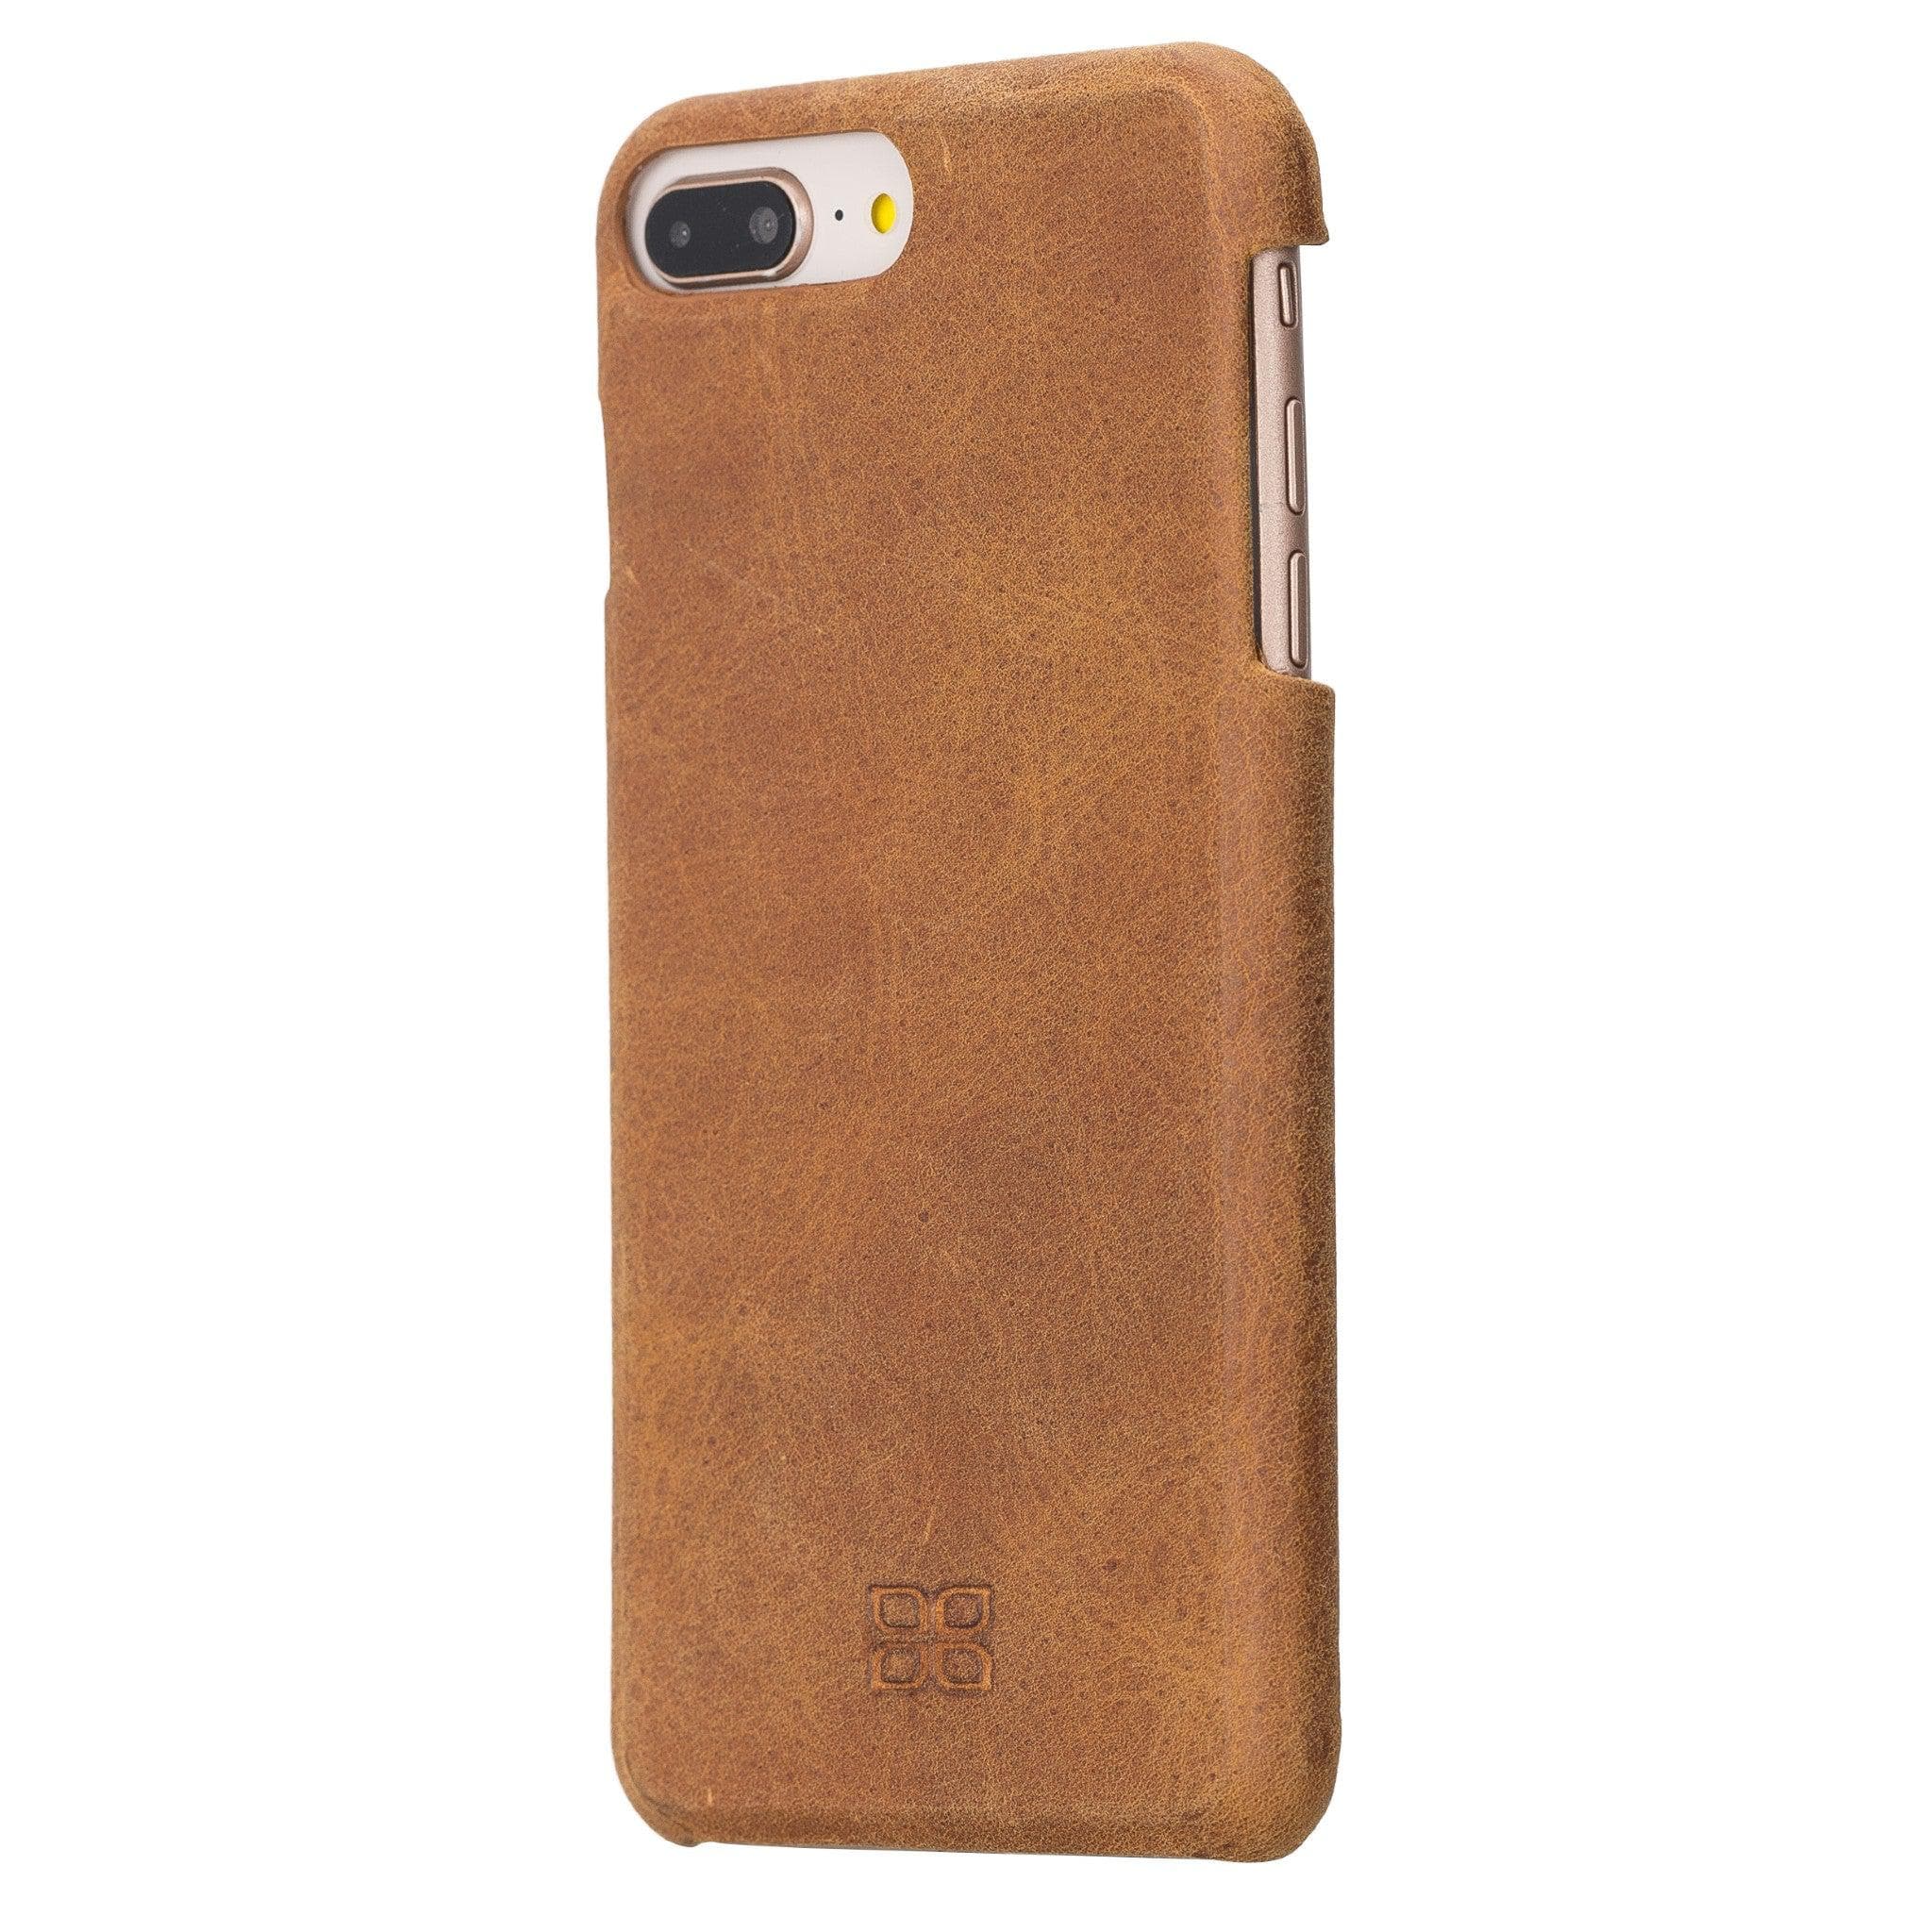 Apple iPhone 7 Series Fully Covering Leather Back Cover Case Bouletta LTD